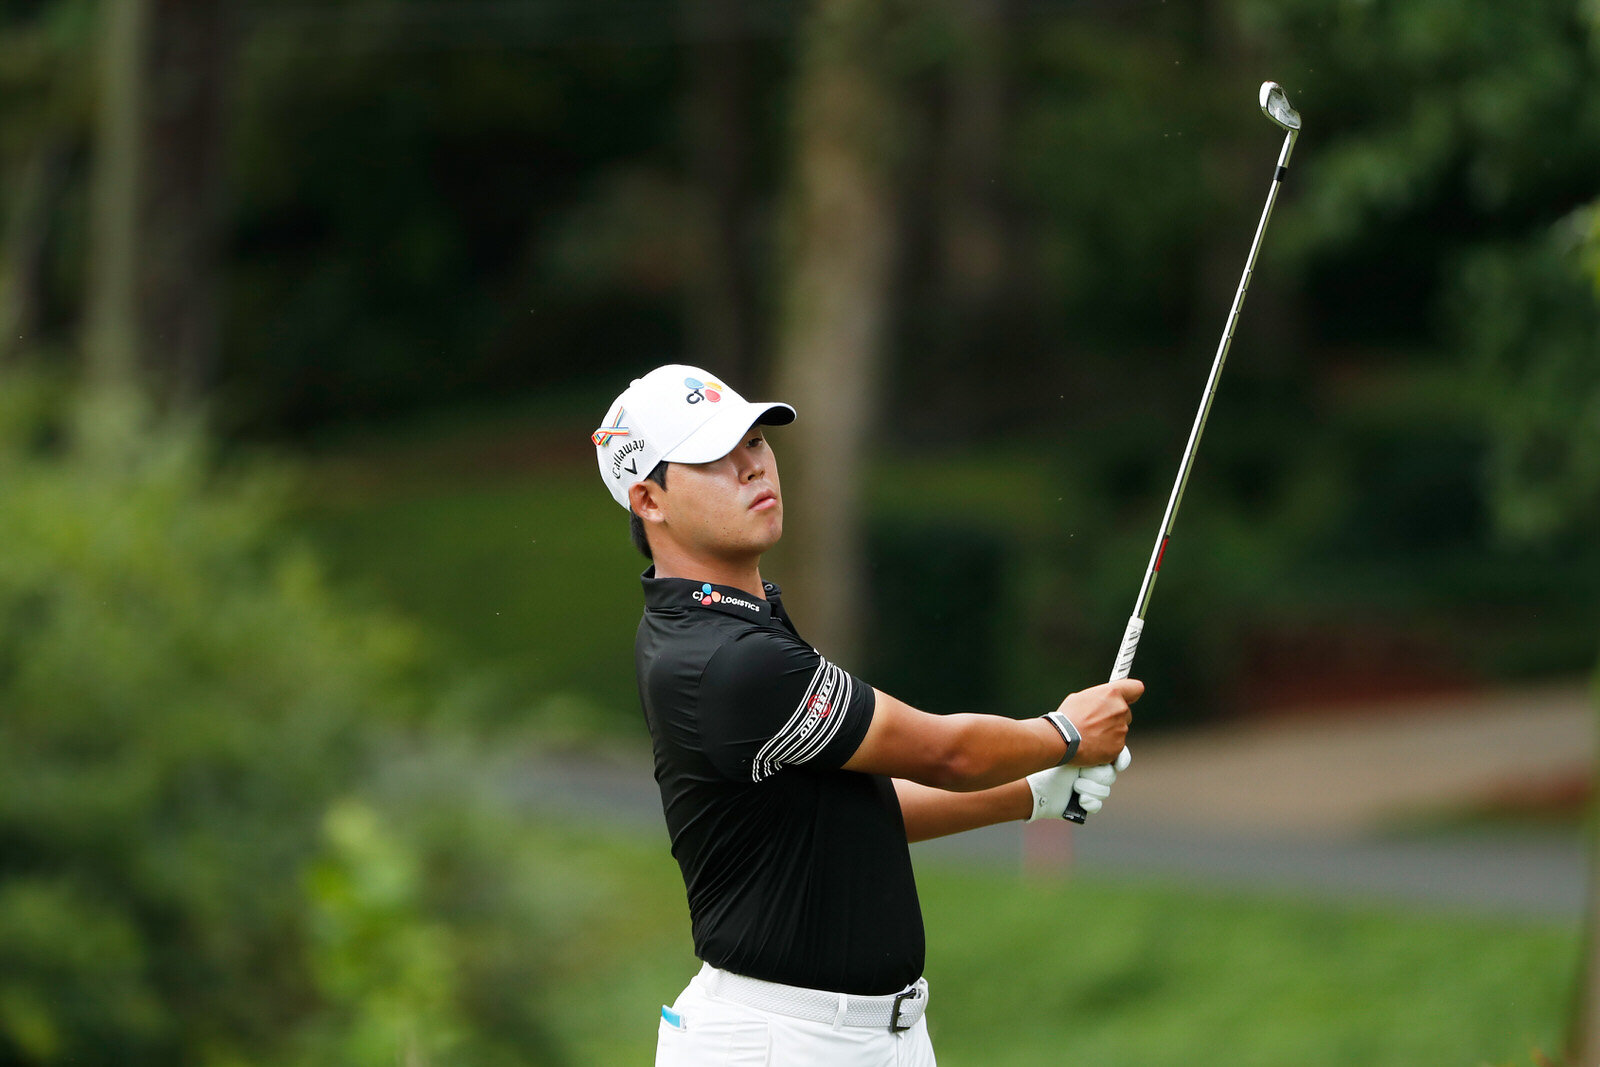  GREENSBORO, NORTH CAROLINA - AUGUST 15: Si Woo Kim of South Korea hits a hole in one from the third tee during the third round of the Wyndham Championship at Sedgefield Country Club on August 15, 2020 in Greensboro, North Carolina. (Photo by Chris K